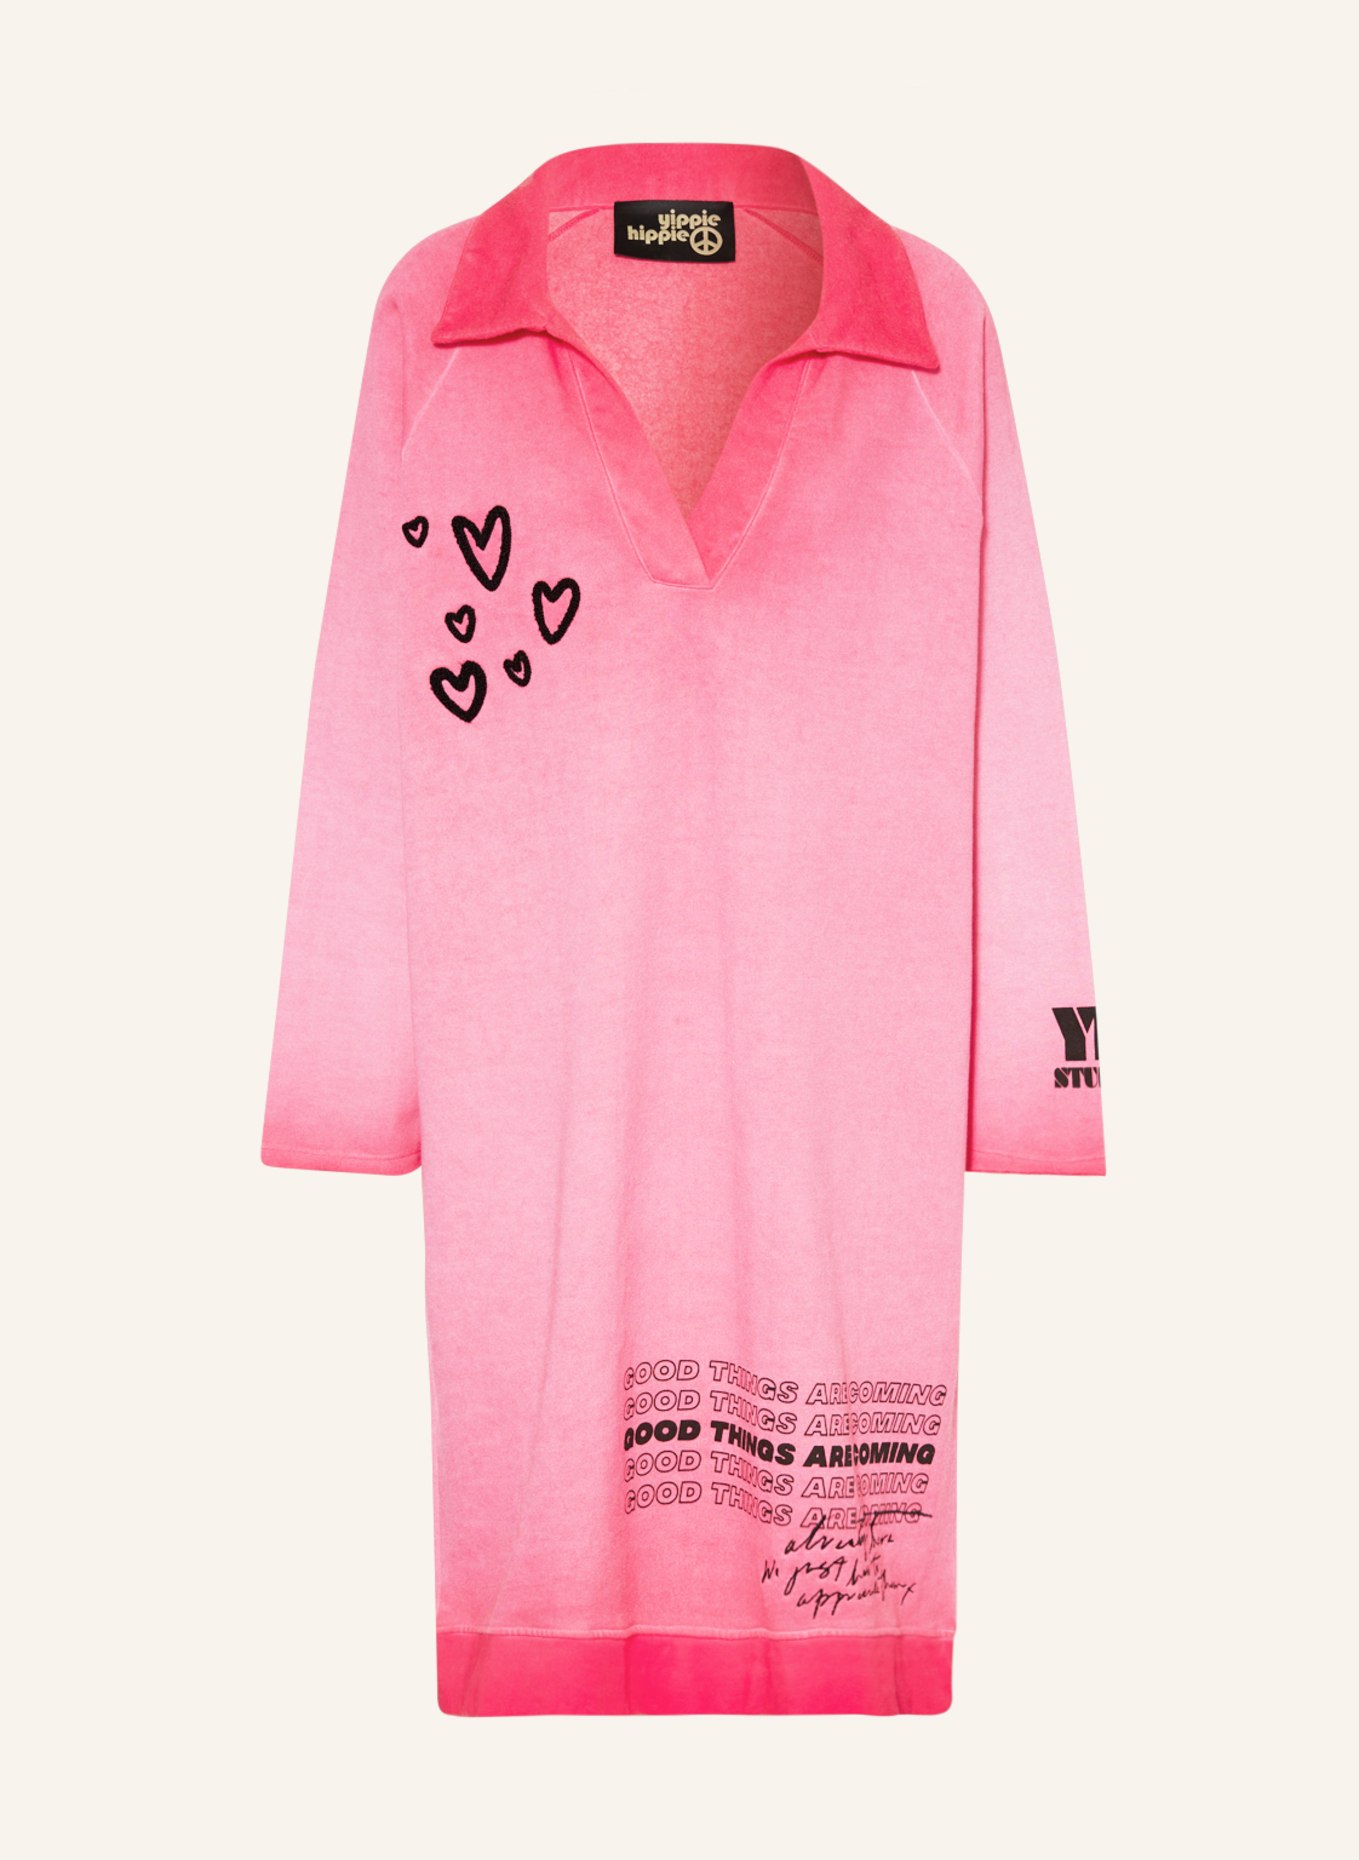 yippie hippie Oversized sweater dress, Color: PINK (Image 1)